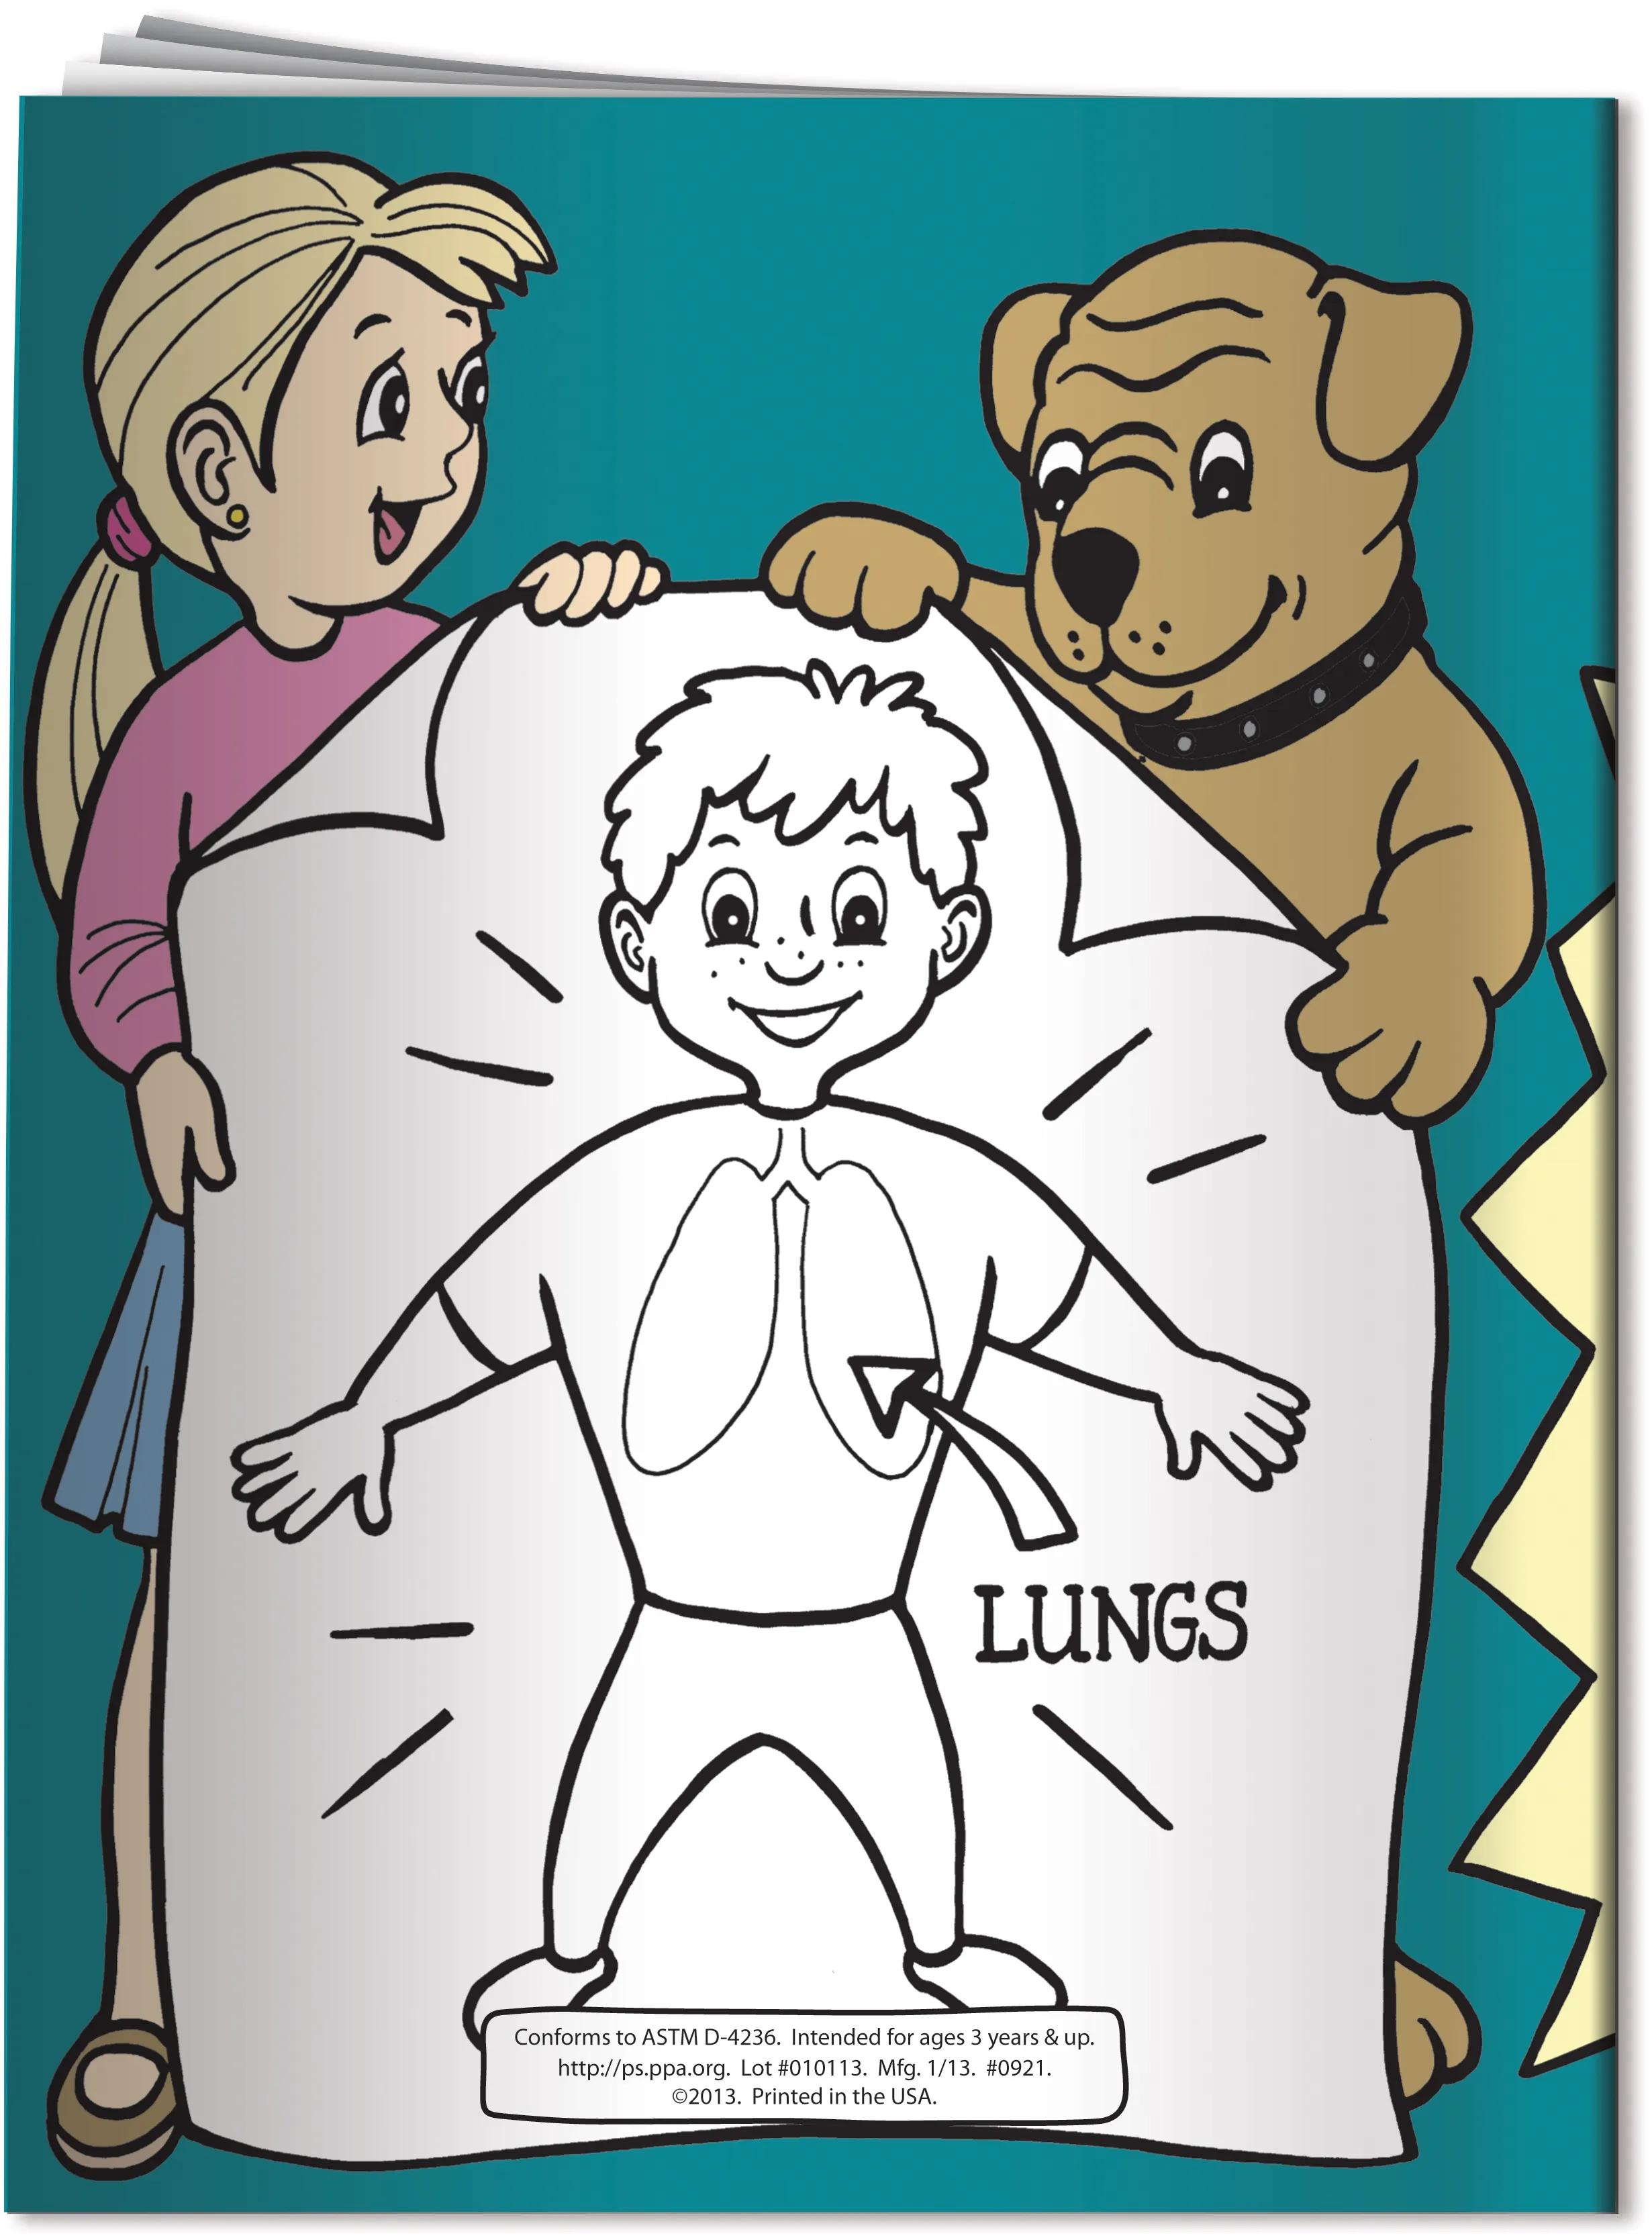 Coloring Book: Meet Buddy Your Healthy Body 1 of 3